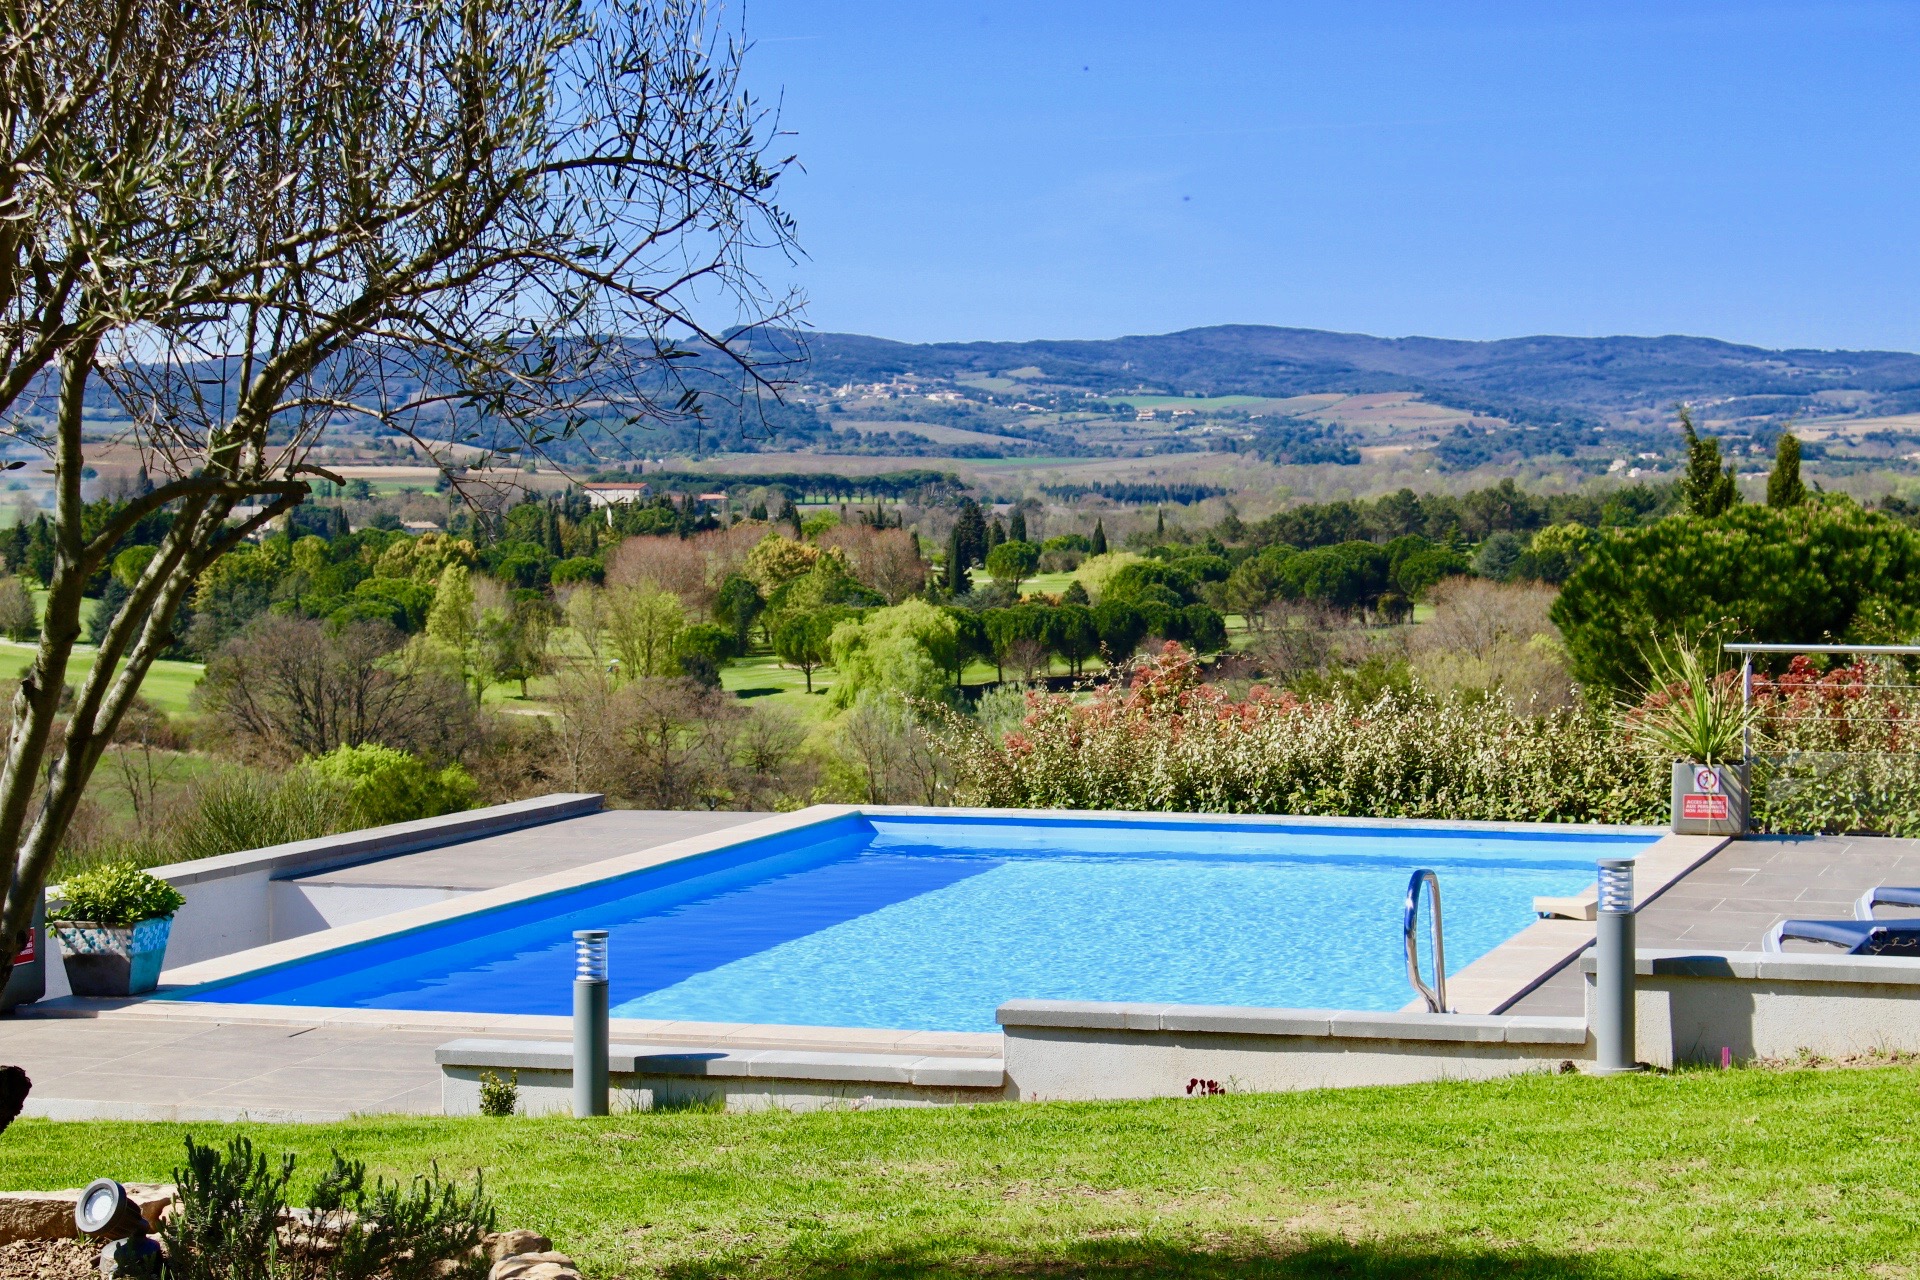 Our pool overlooking the valley and Pyrenees